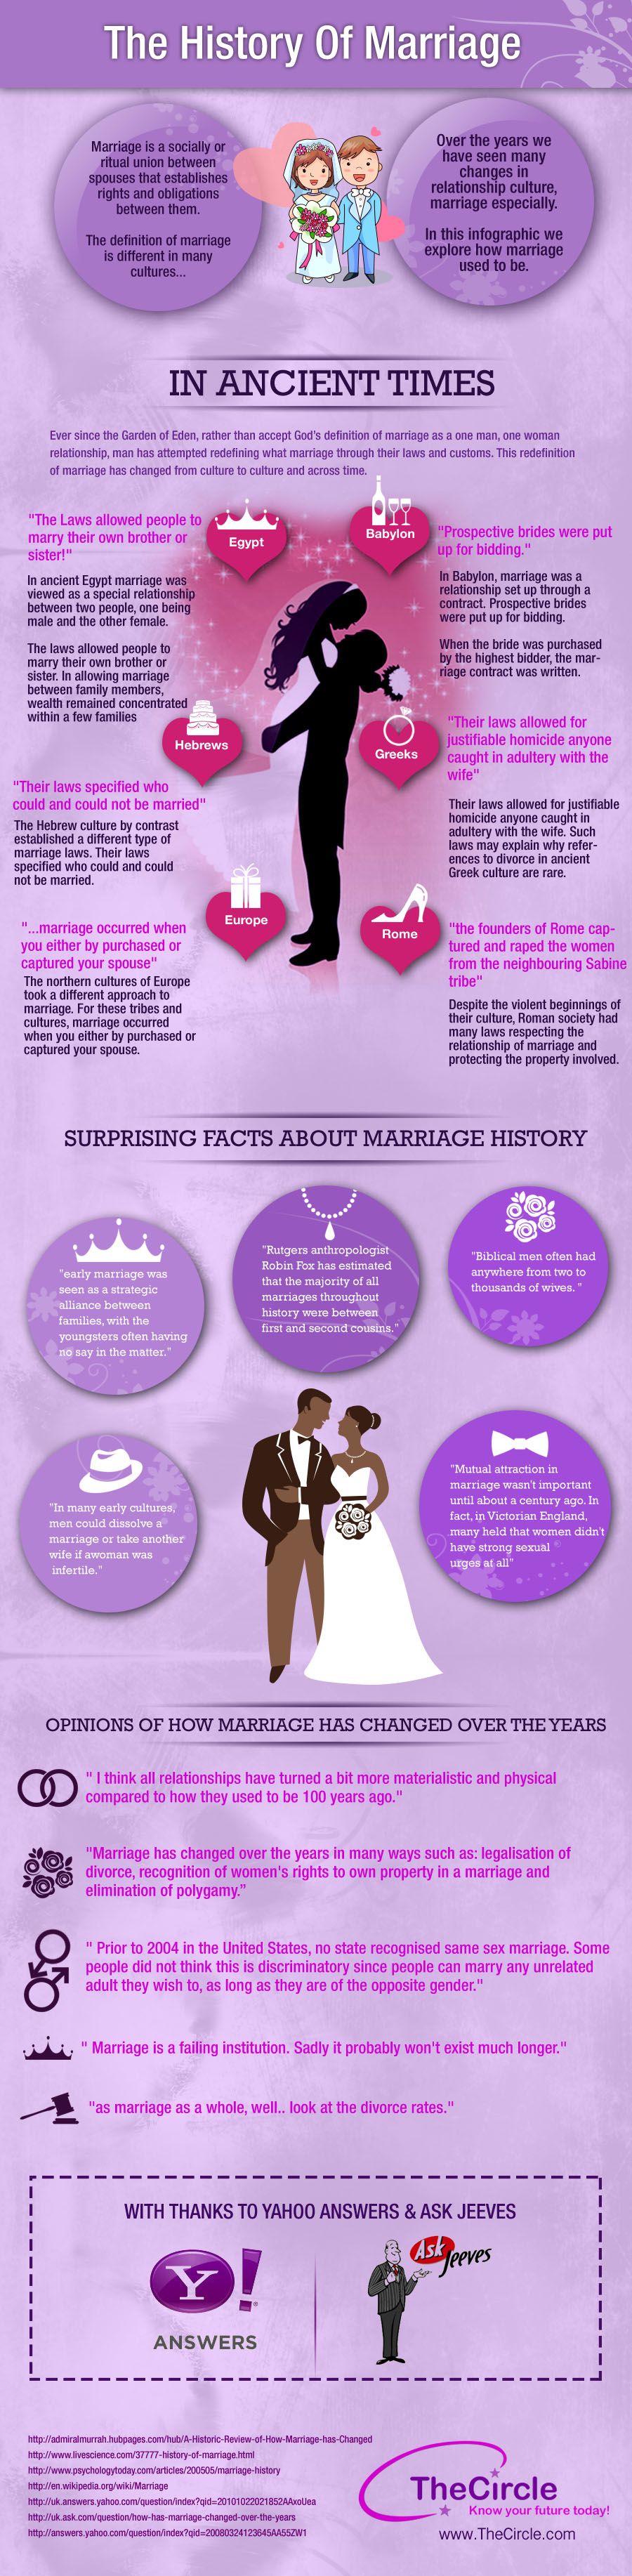 the-history-of-marriage_5258dc30733b7